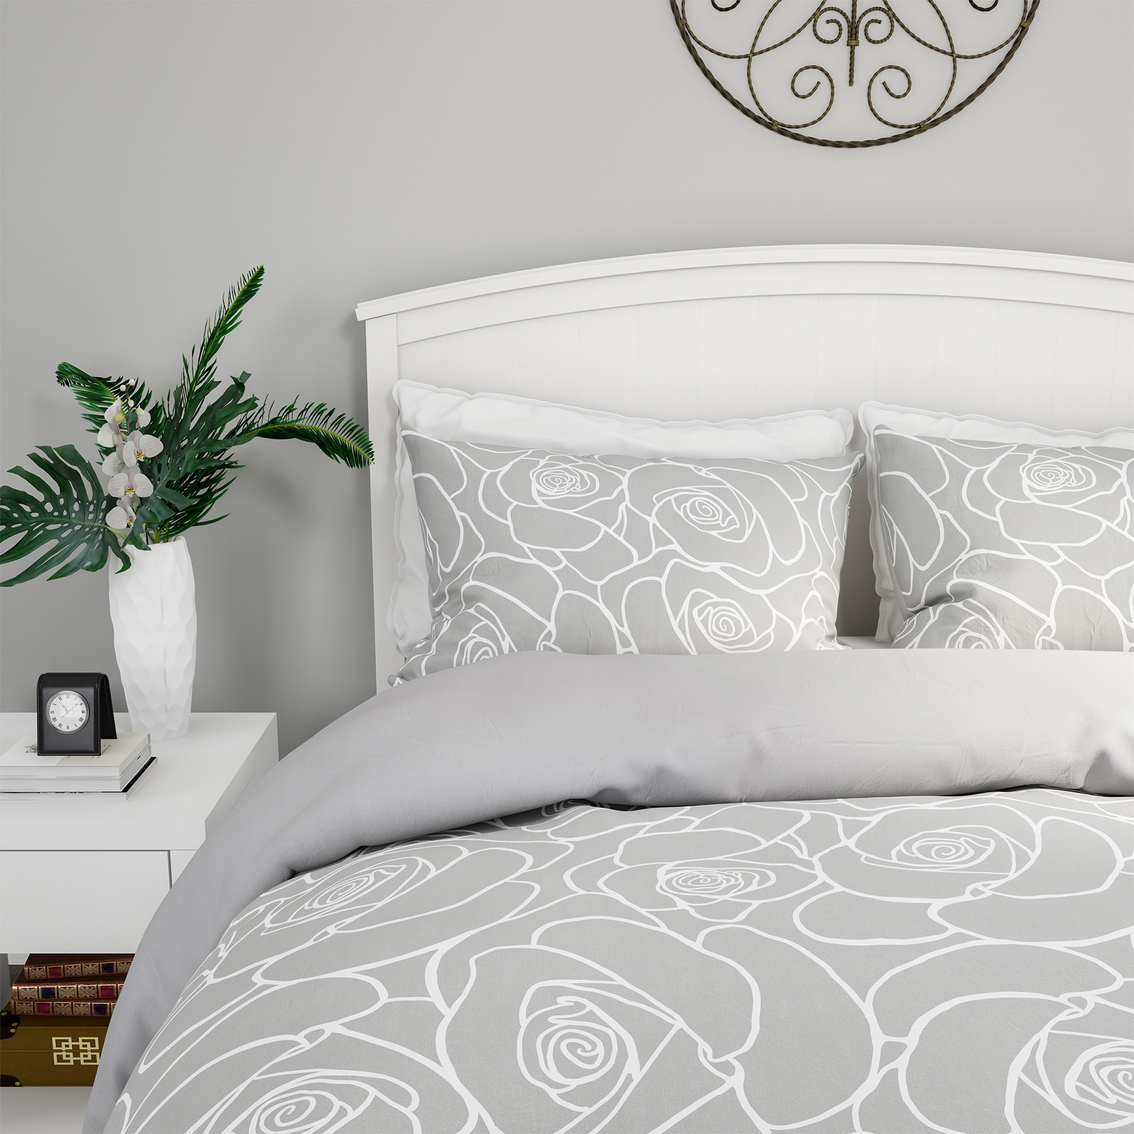 Lavish Home Bed of Roses 3 Pc. Reversible Comforter Set - Image 2 of 7